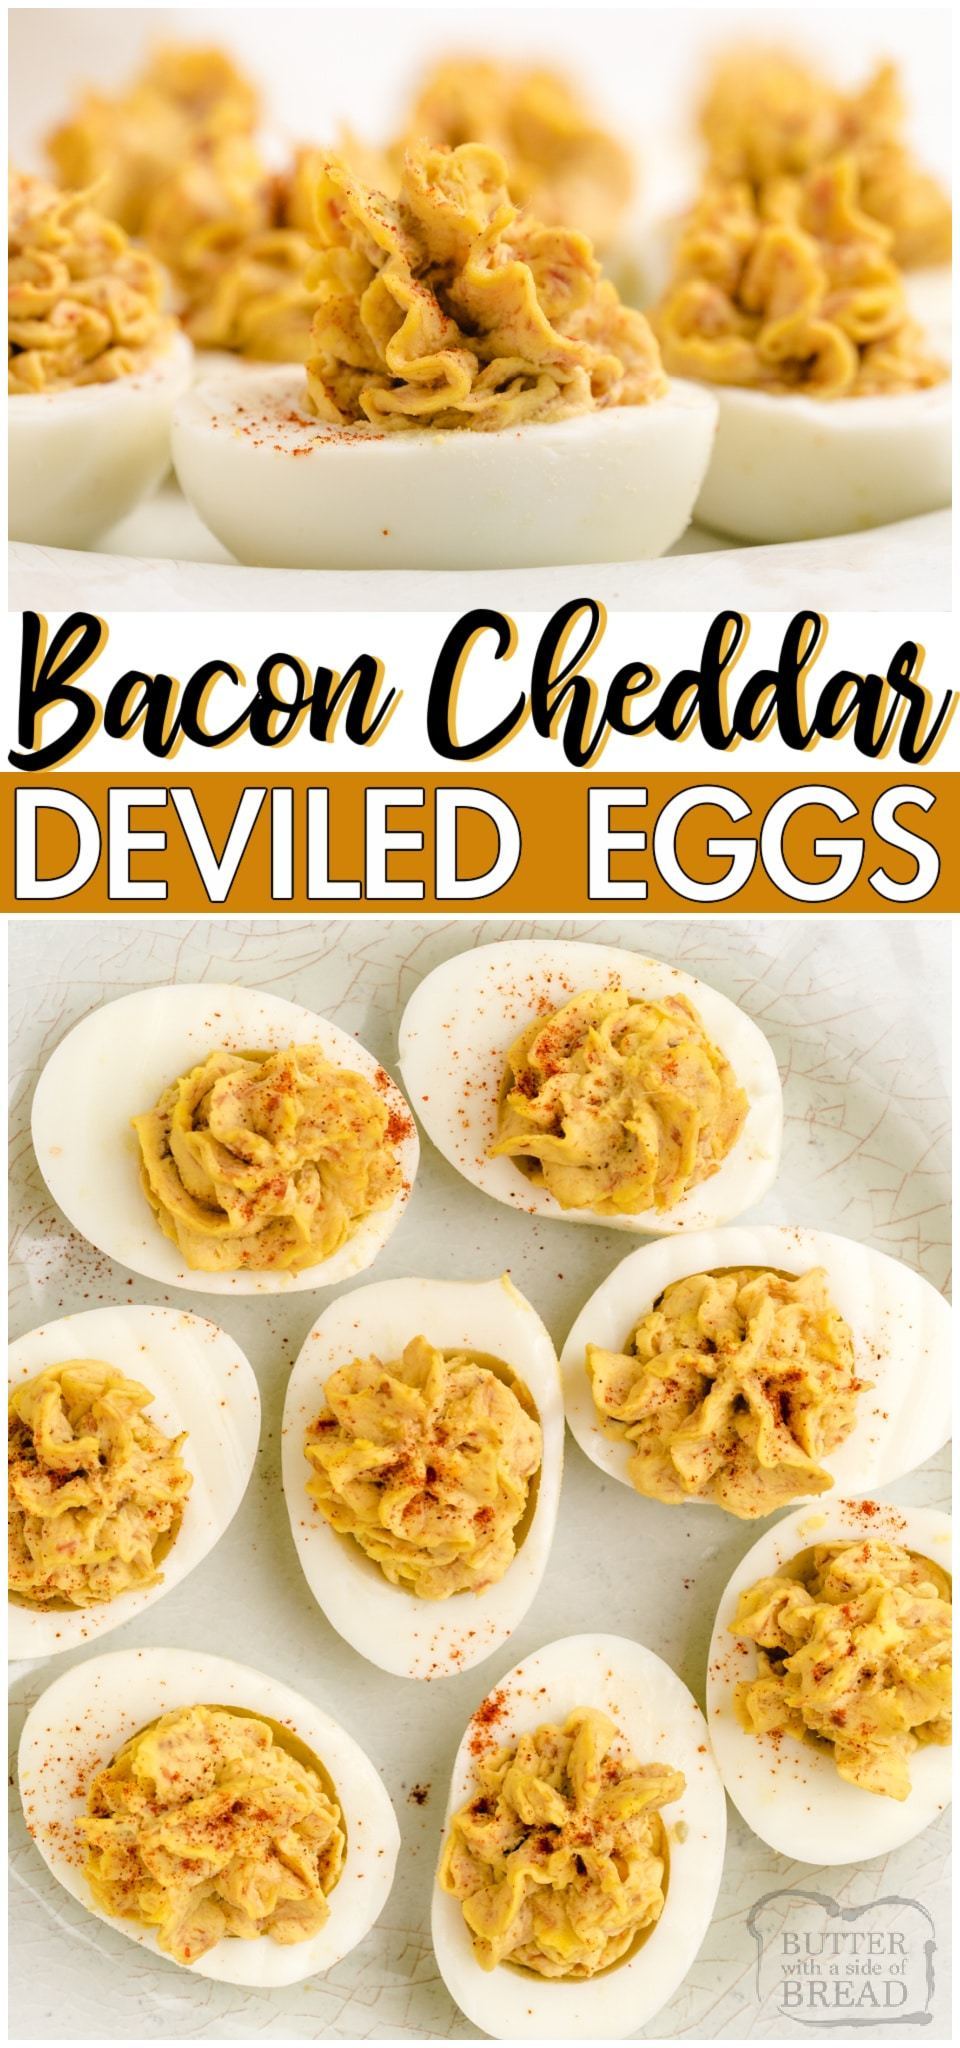 Bacon cheddar deviled eggs is a delicious twist on a classic! Traditional Deviled Eggs recipe with the addition of bacon and cheddar cheese for a fantastic savory appetizer. 